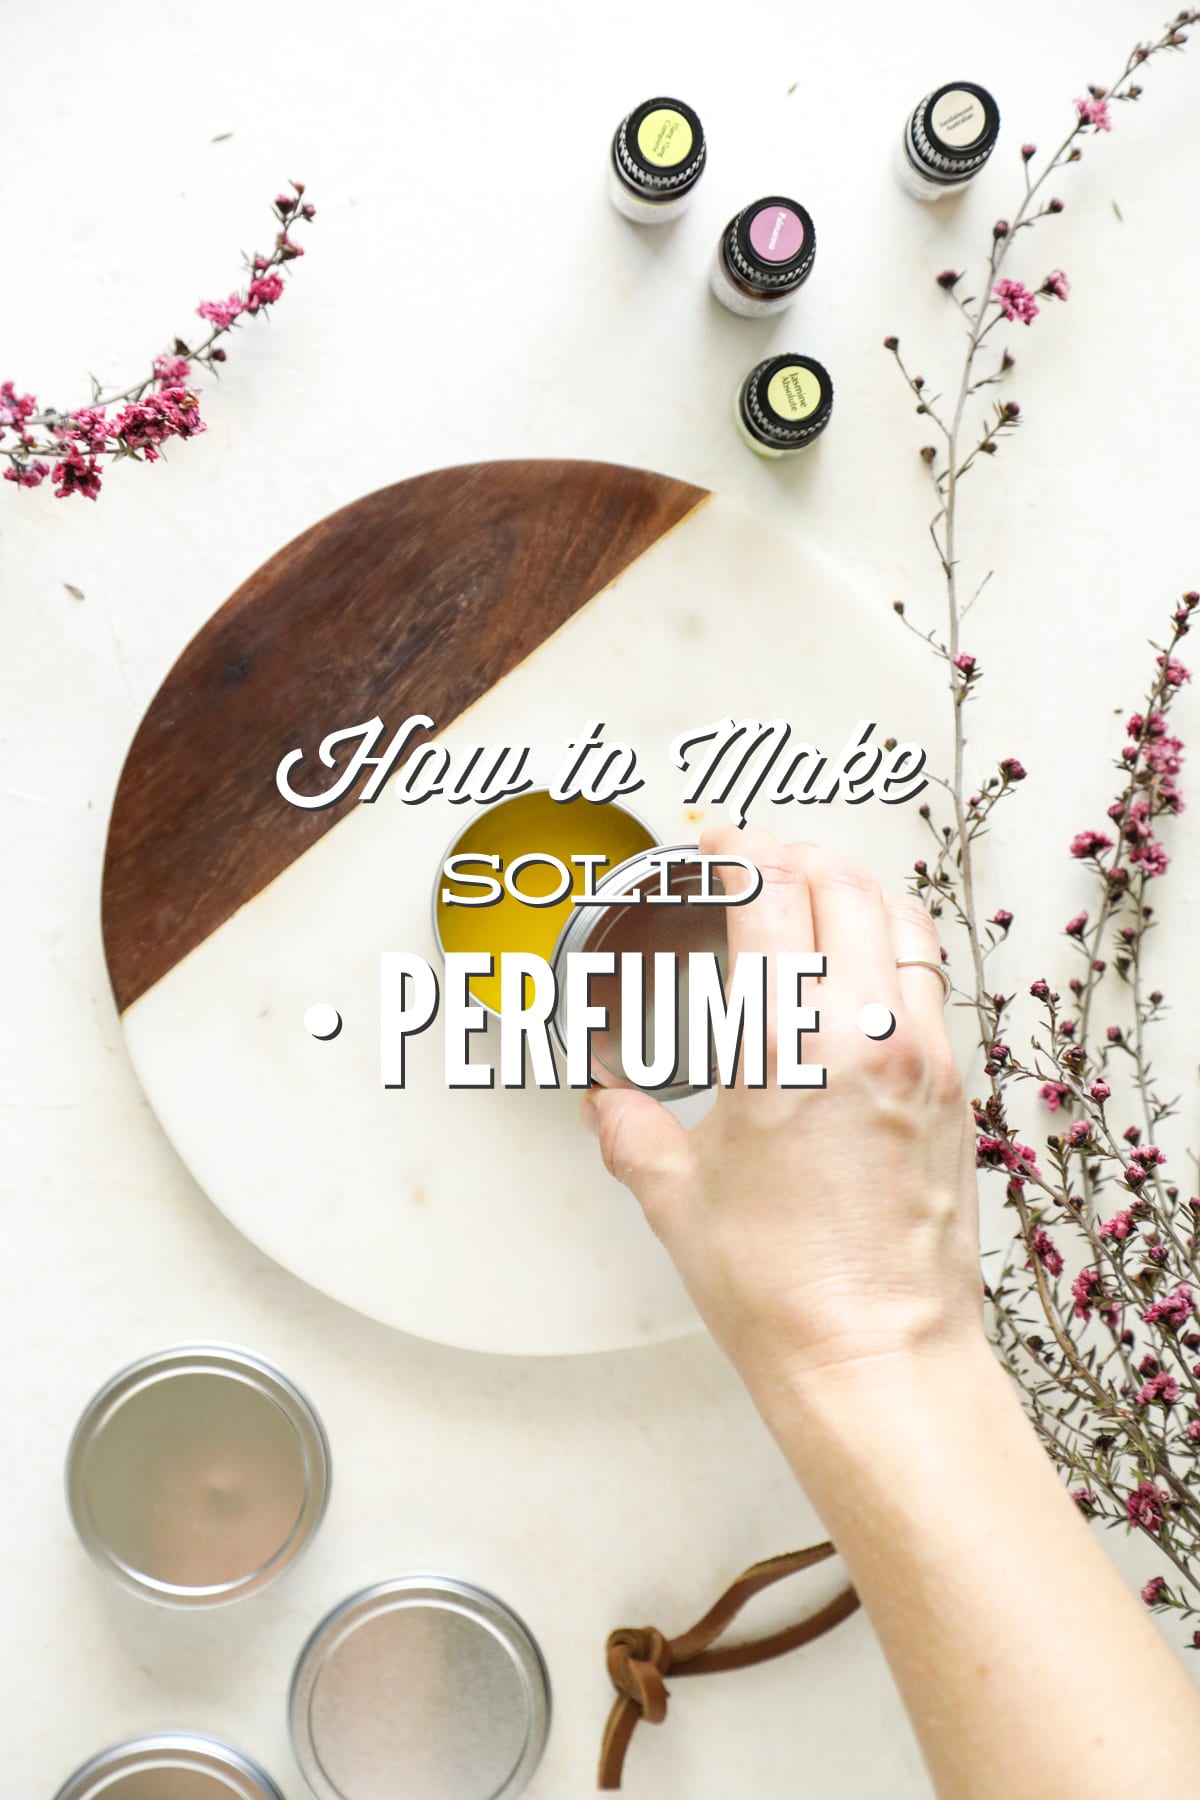 How to Make Solid Perfume with Essential Oils